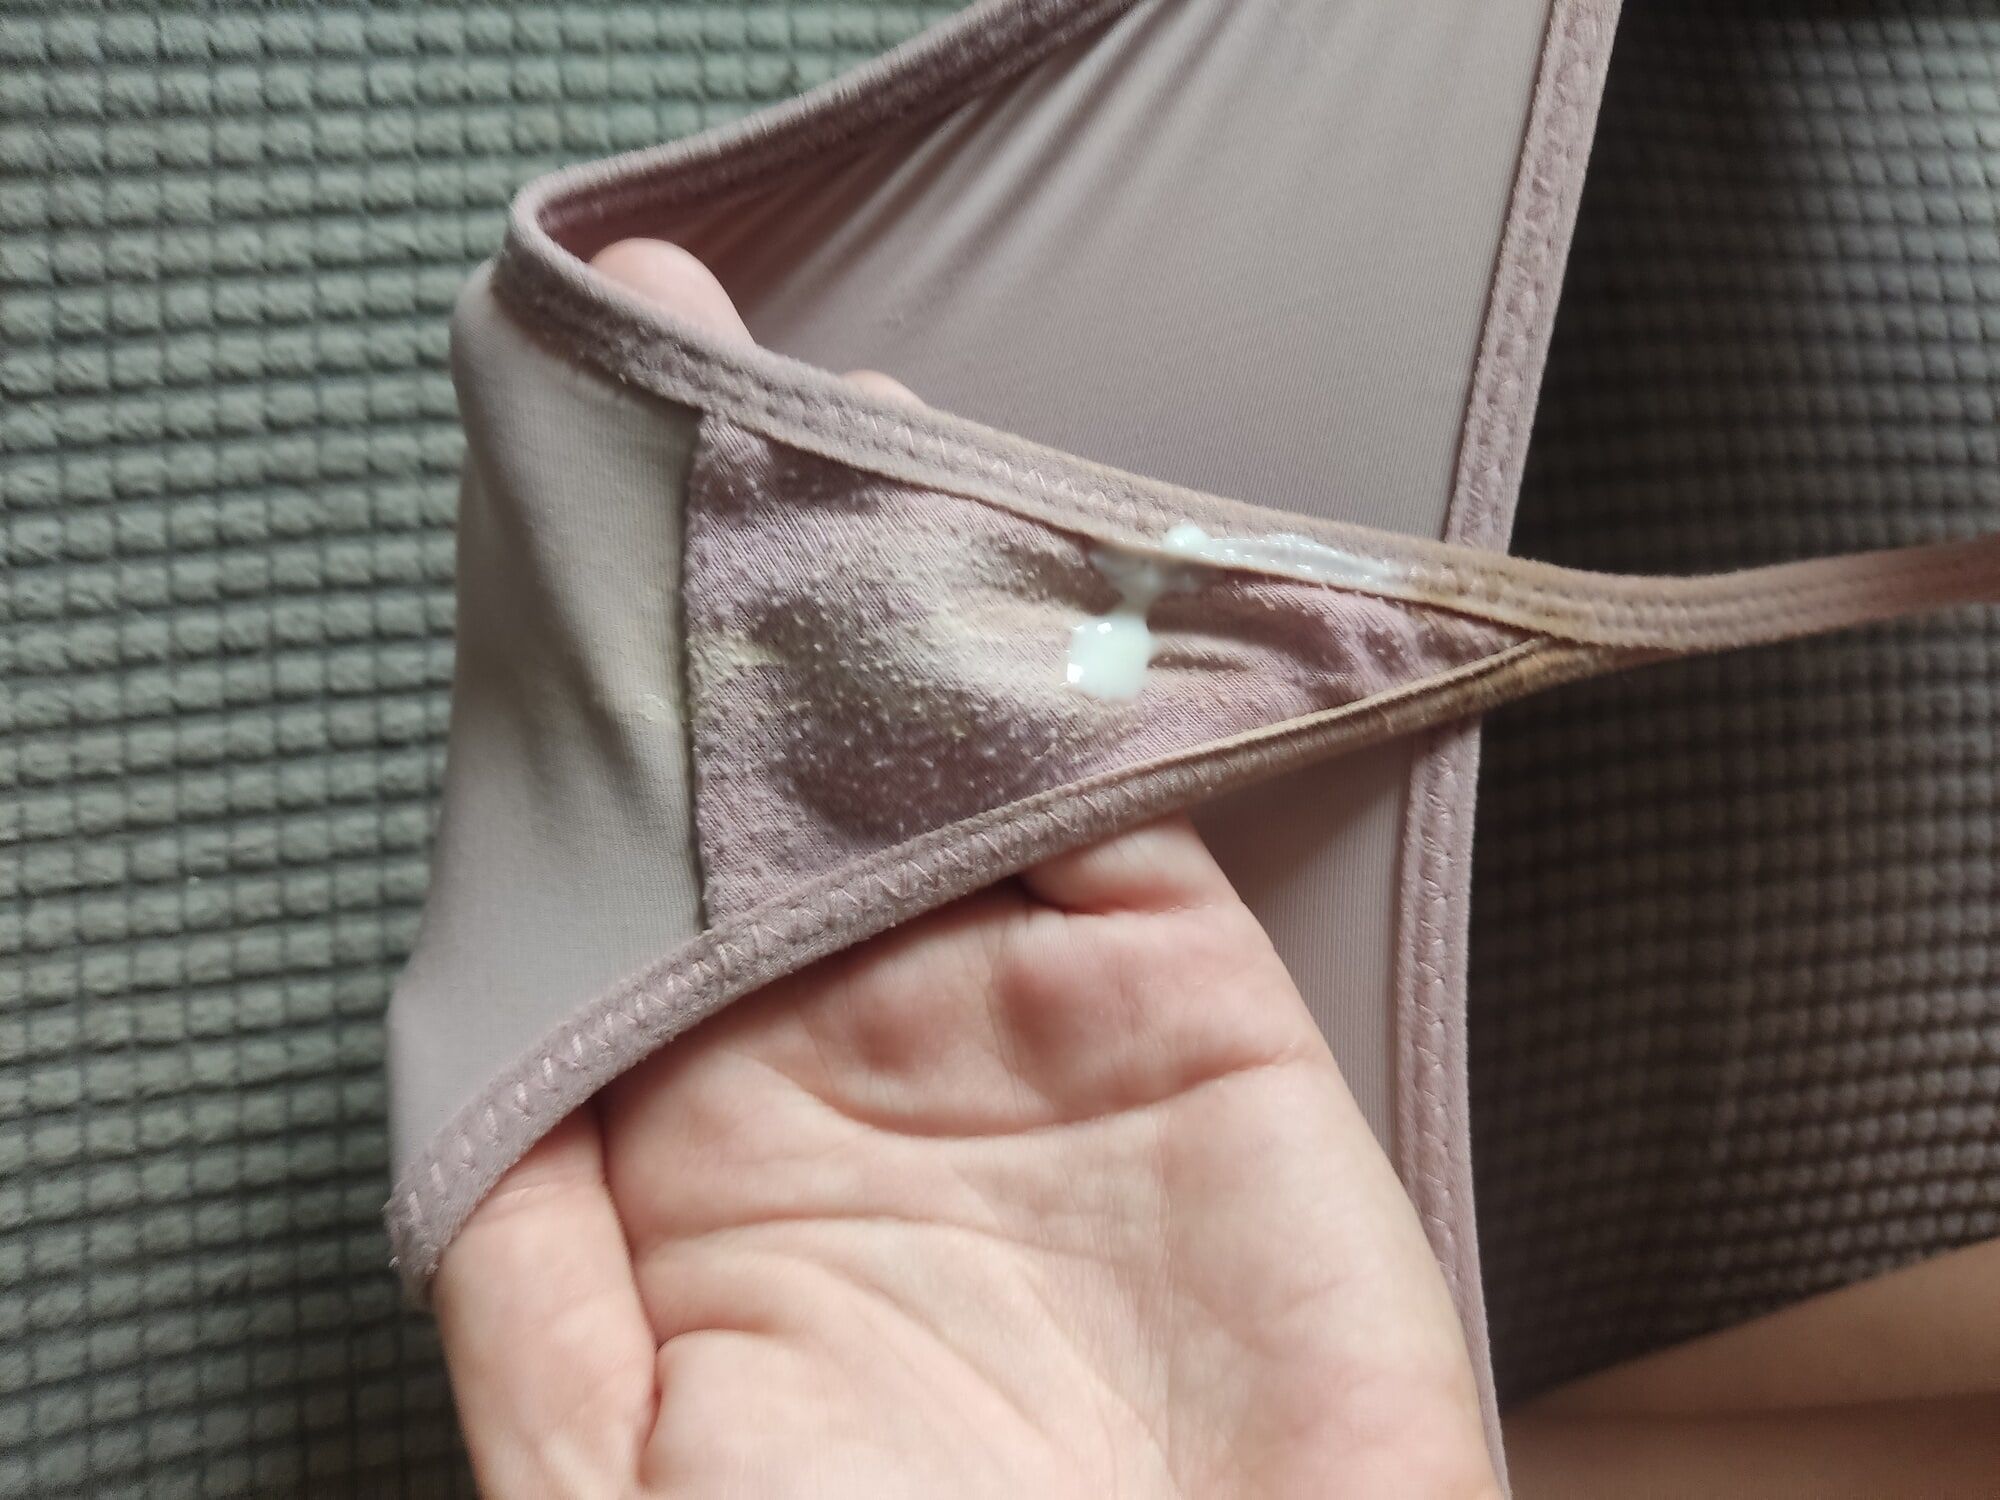 DIRTY AND USED WOMAN PANTIES #3